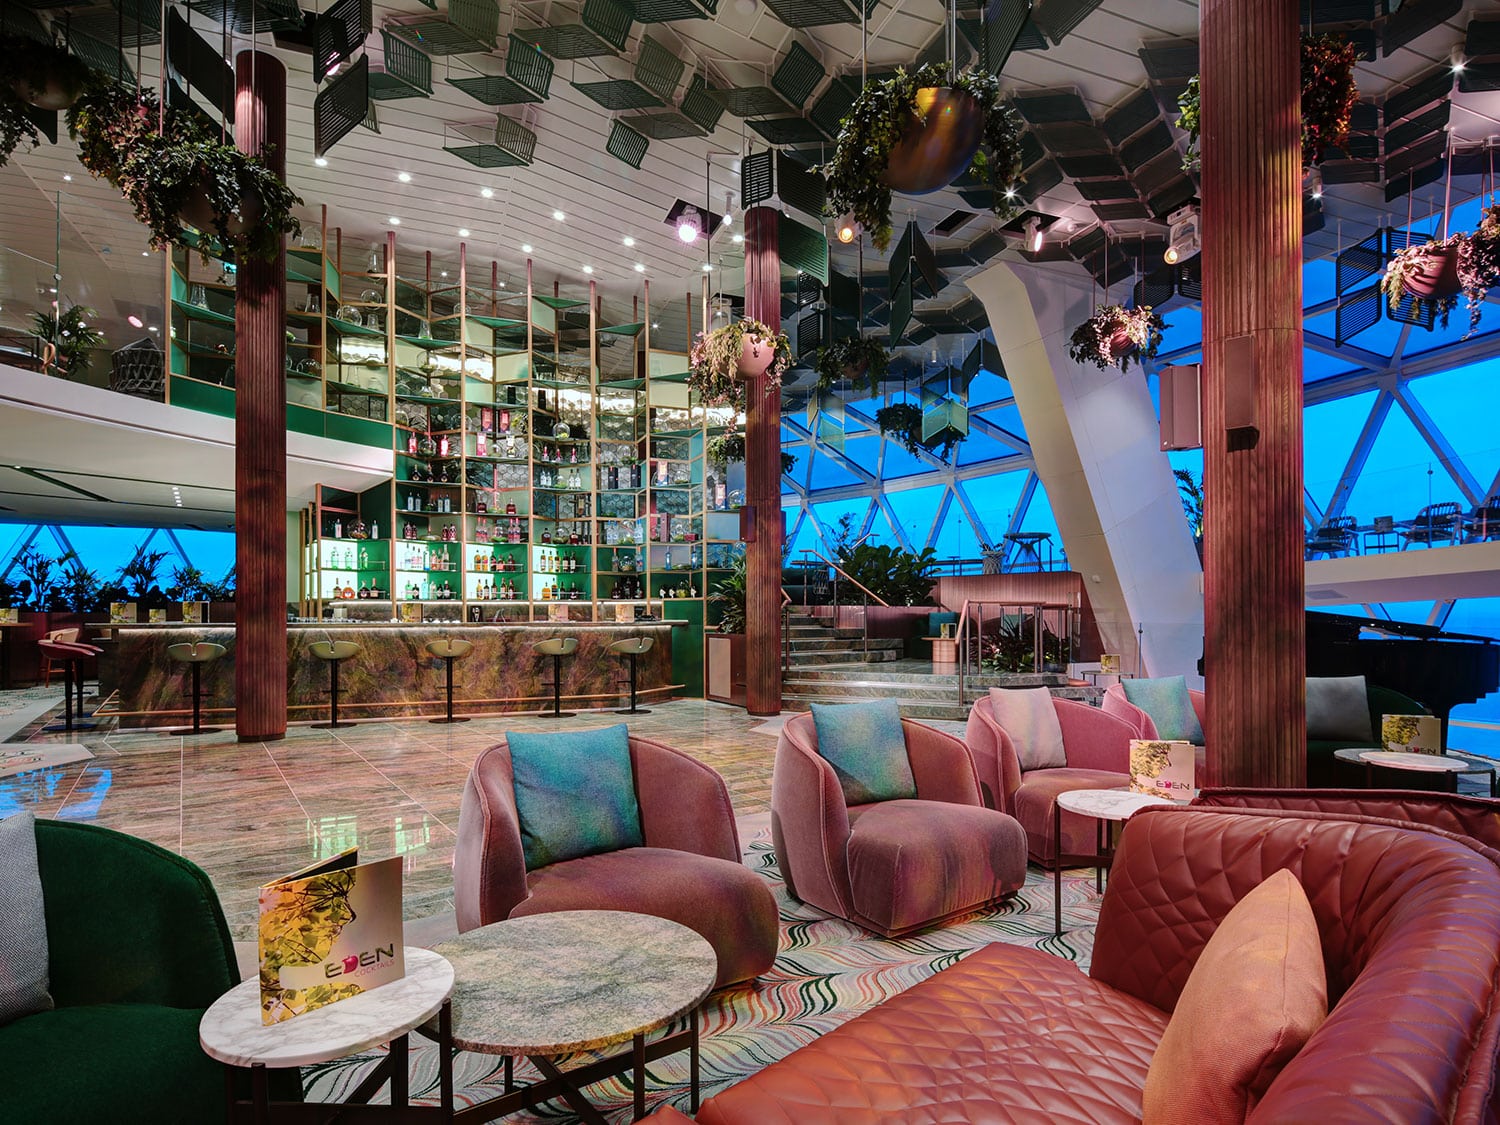 The Eden bar and restaurant on the Celebrity Beyond cruise ship from Celebrity Cruises.